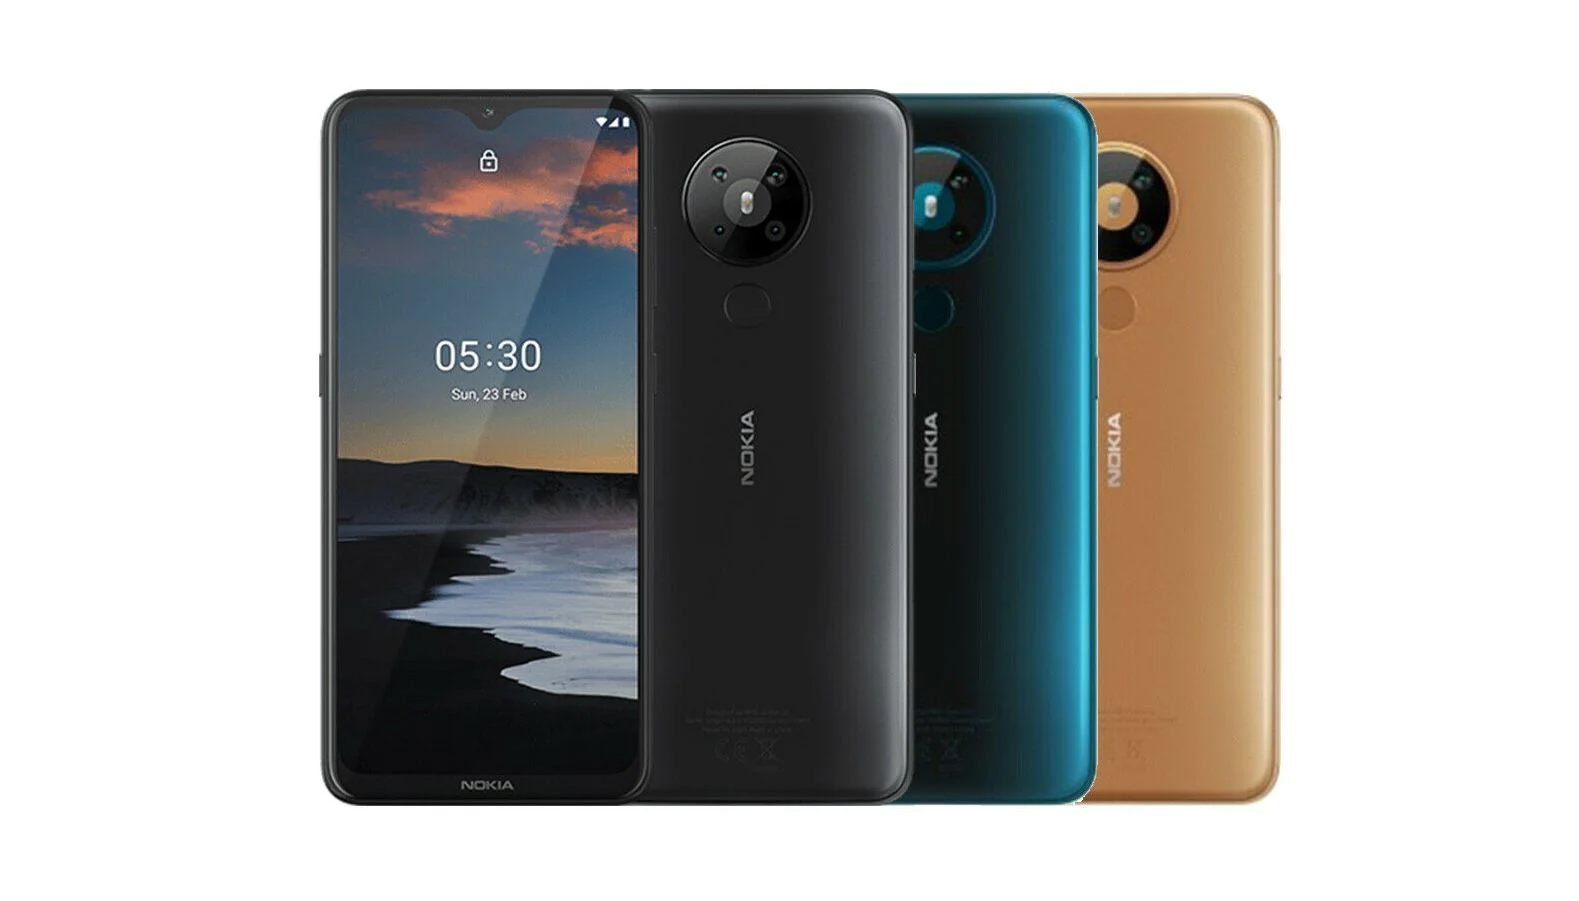 Reportedly, Nokia 5.3 will affordably budget device later this month in India